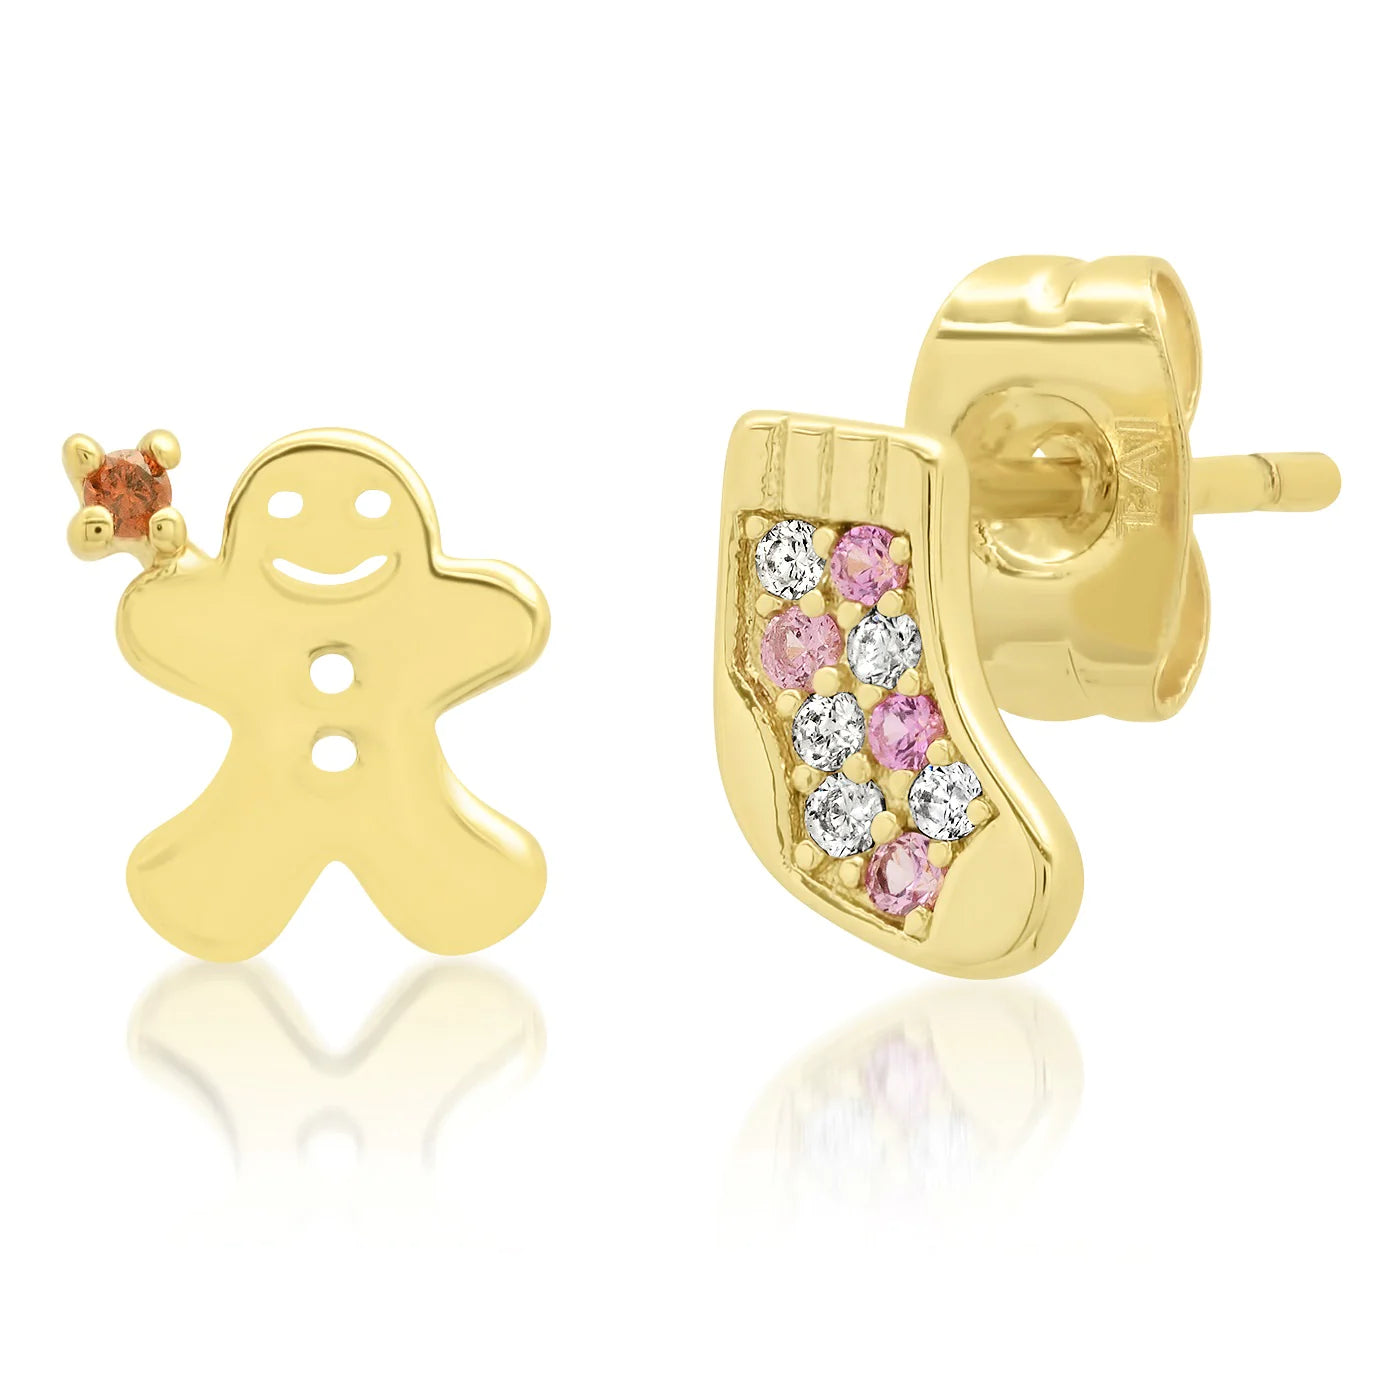 Gingerbread/Stocking Studs